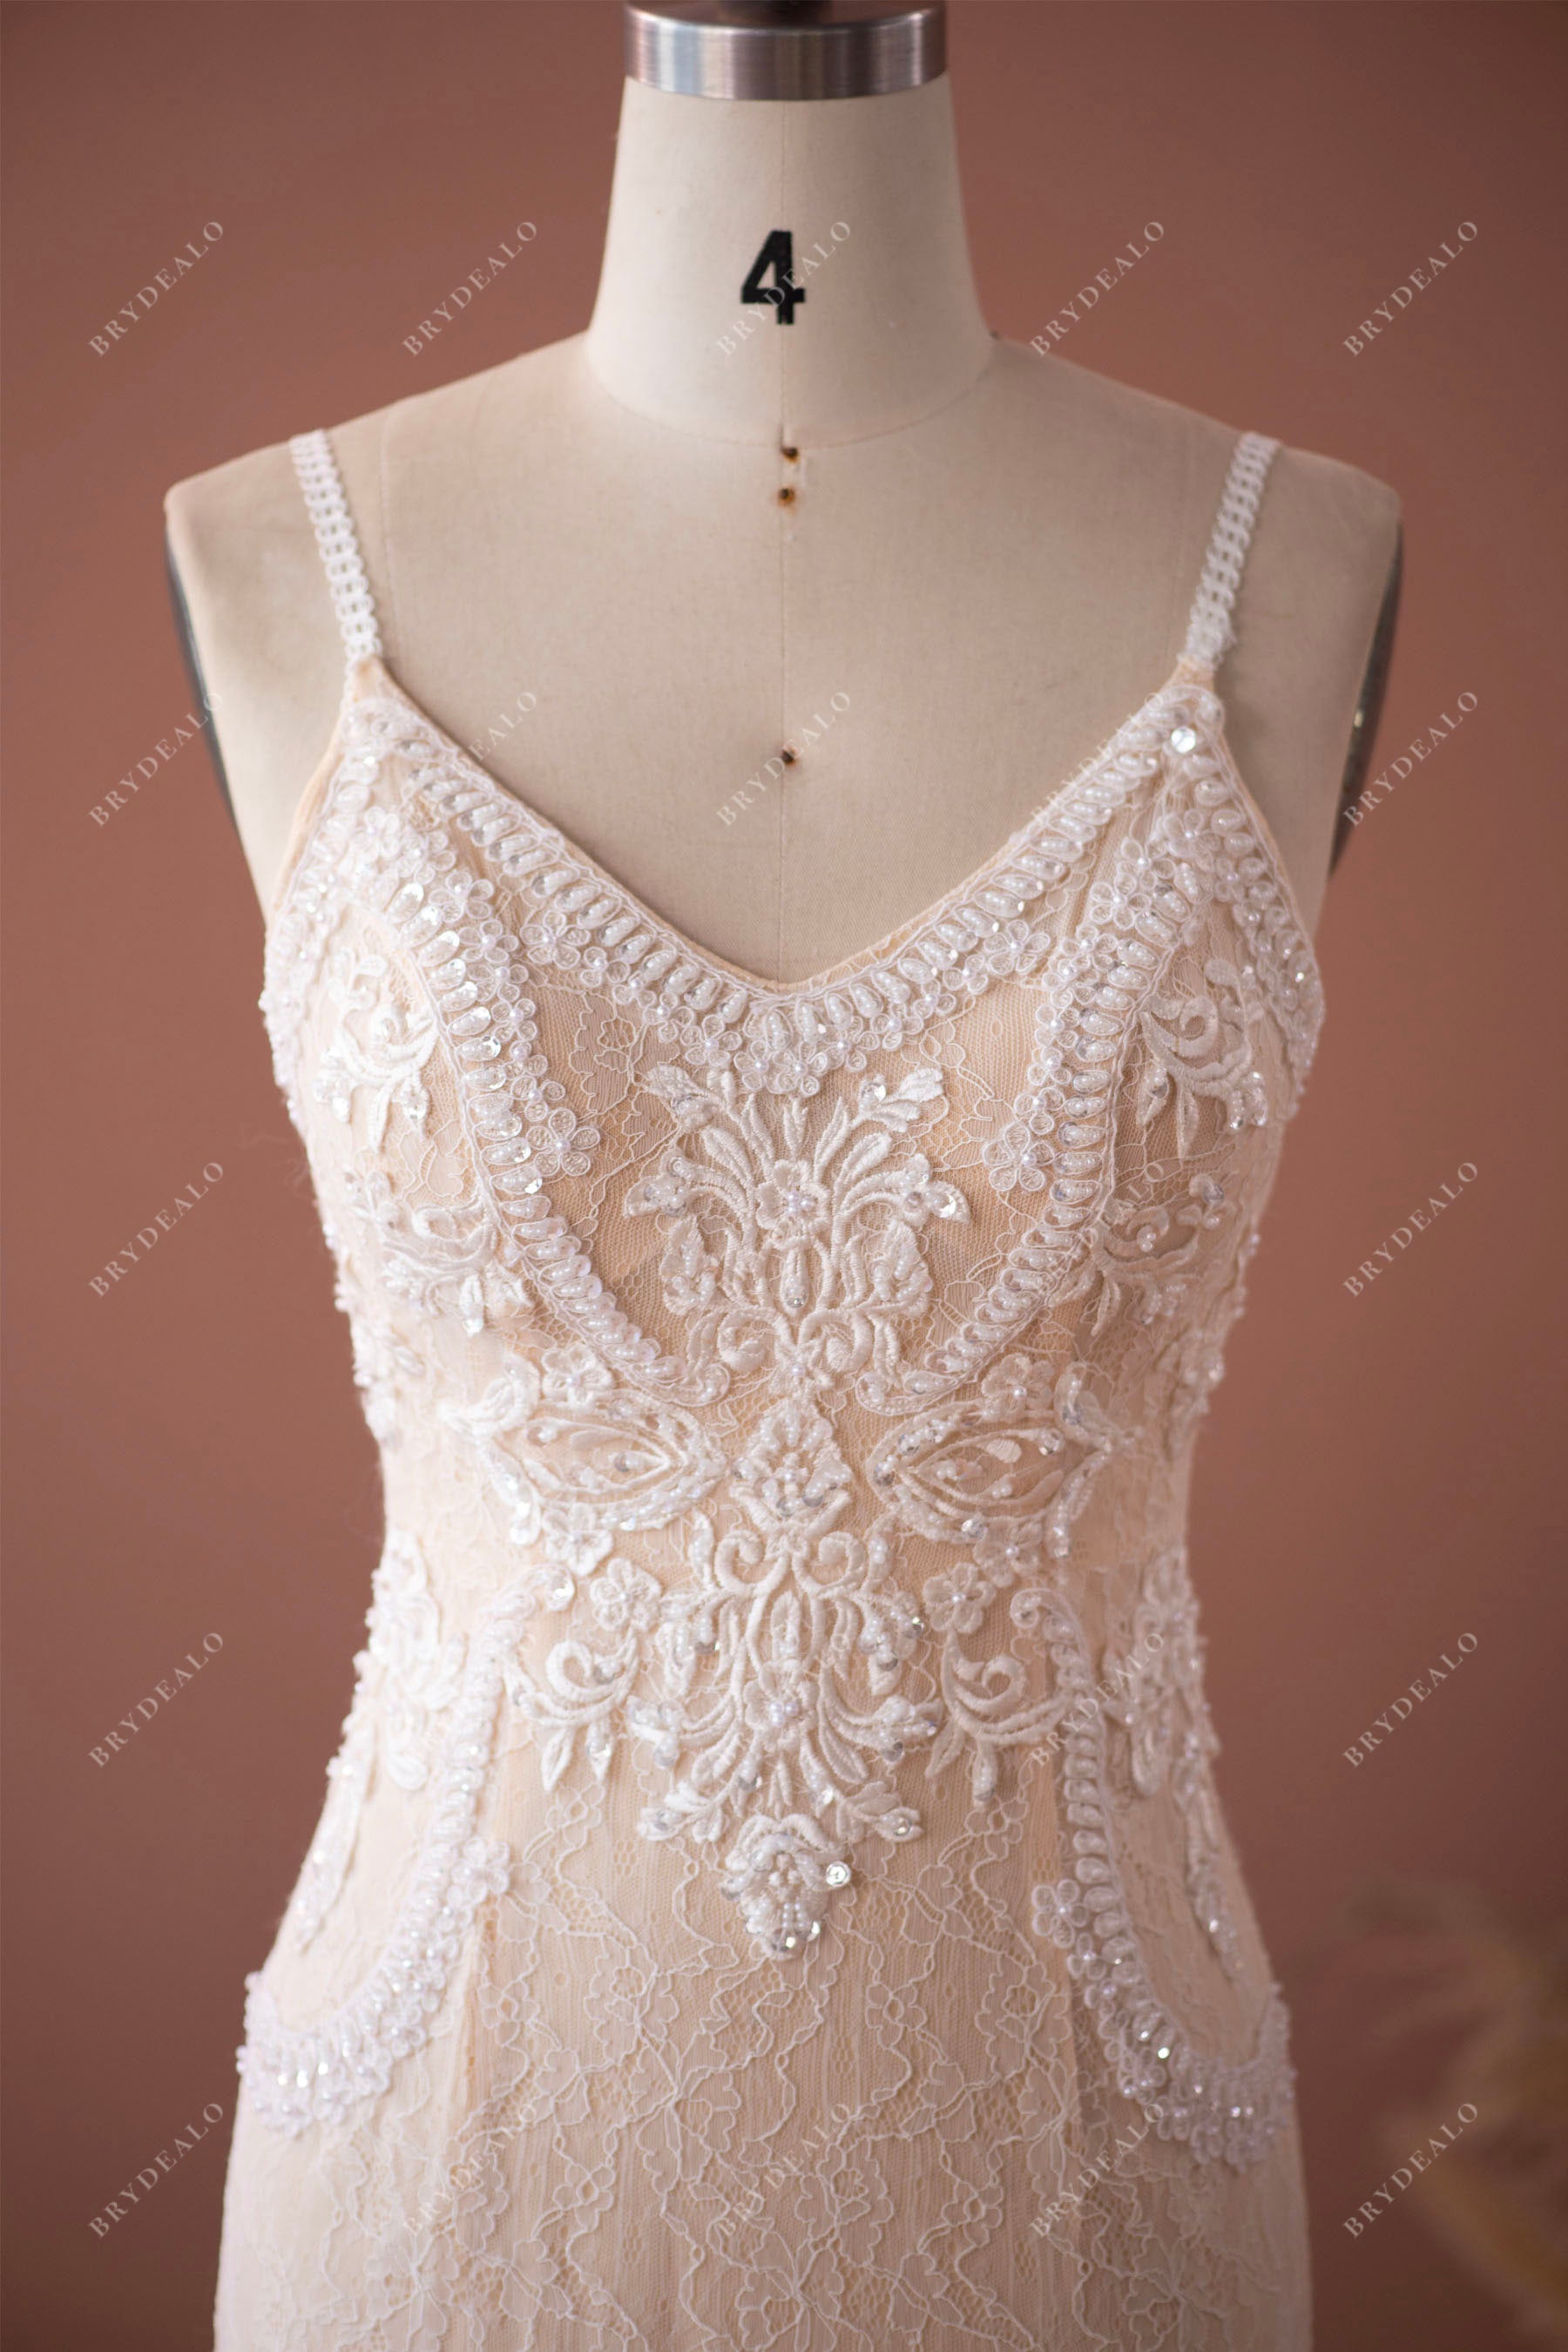 V-neck thin straps lace outdoor wedding dress